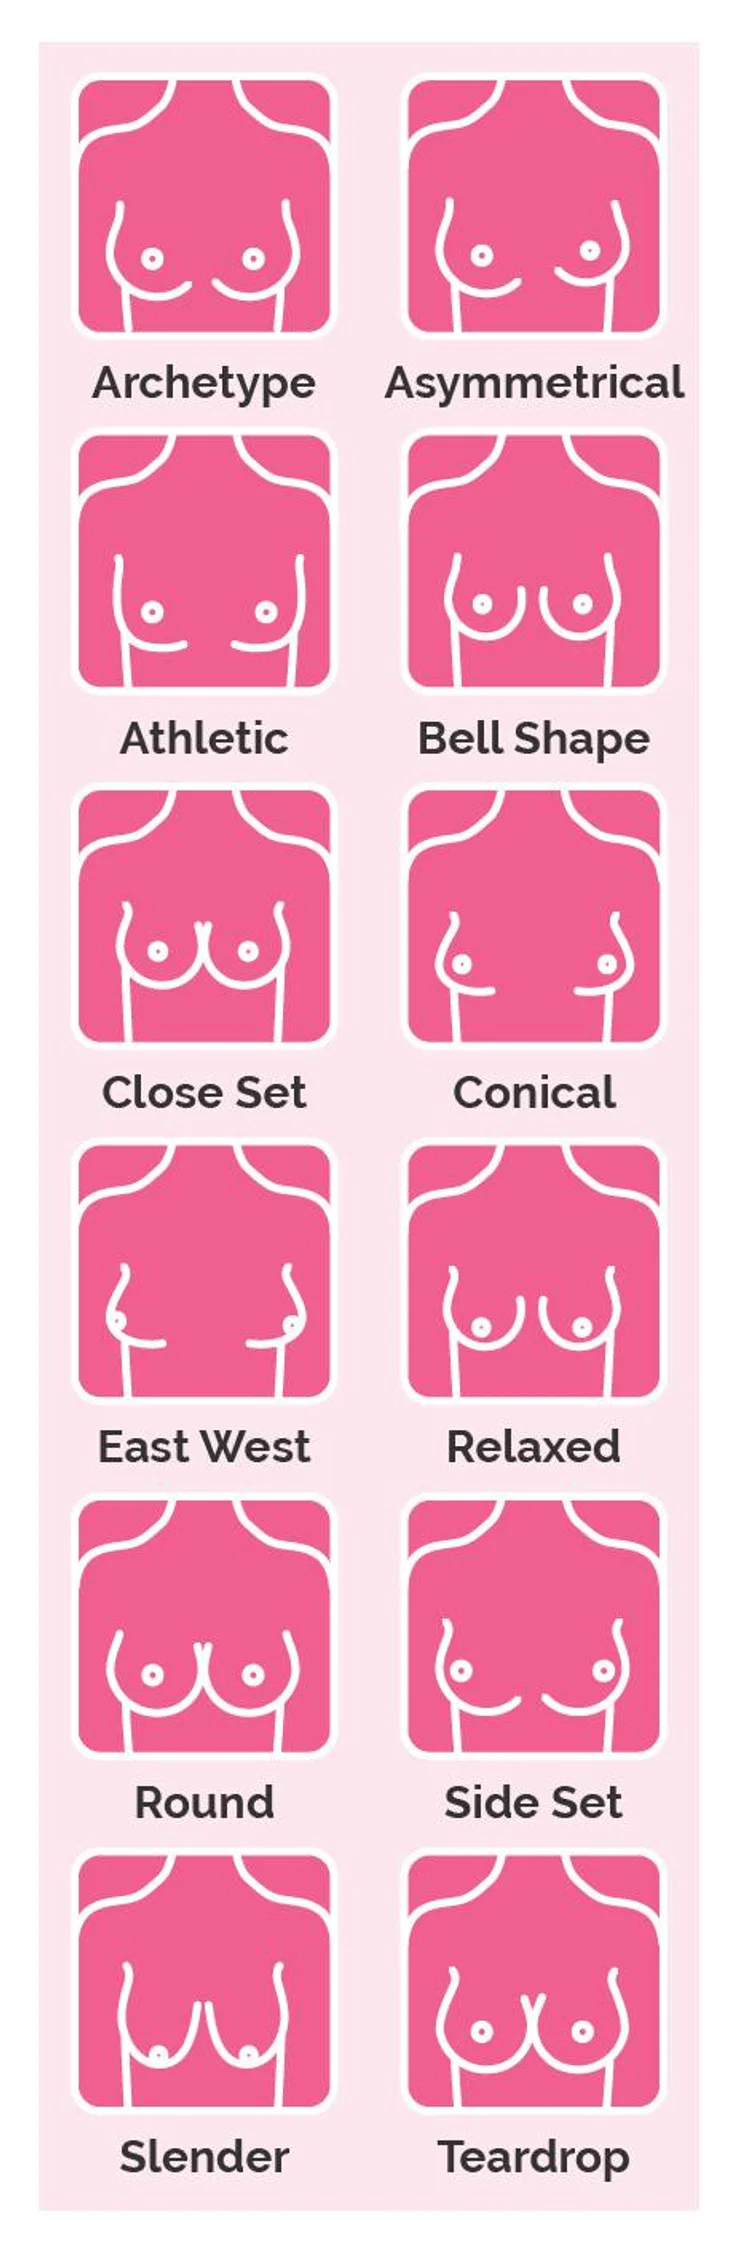 Set of round line icons of different female breast size, body side